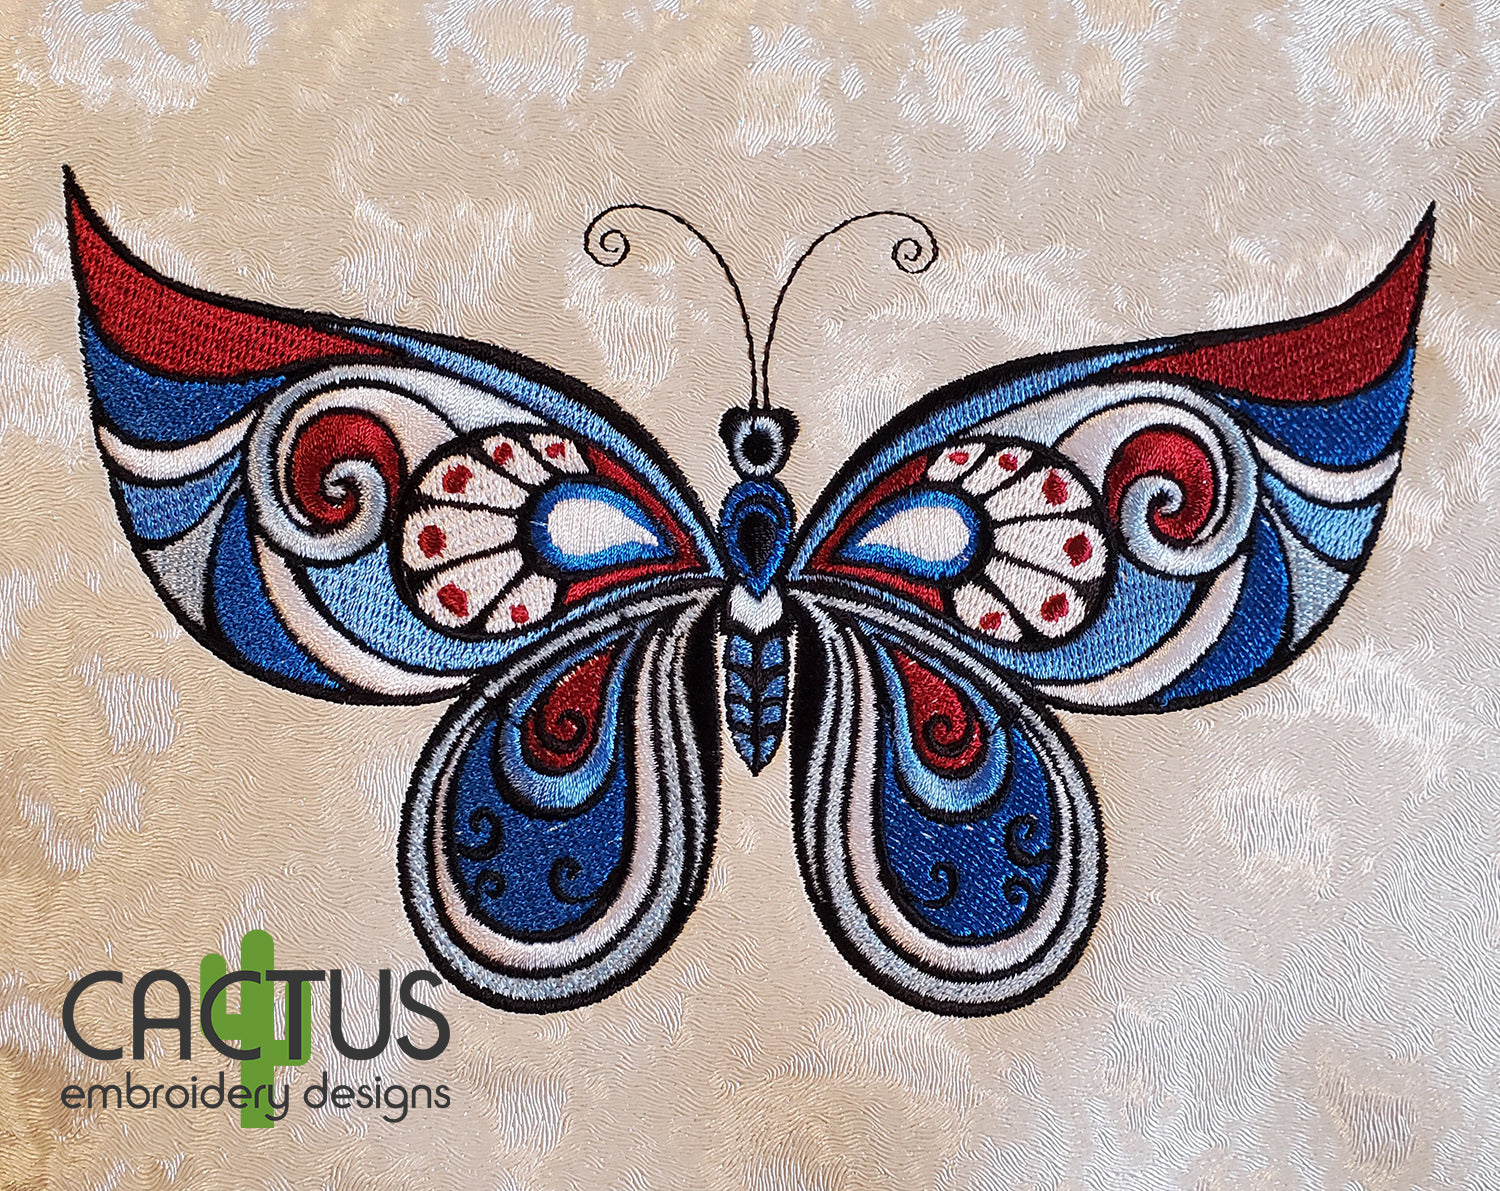 stained glass butterfly designs